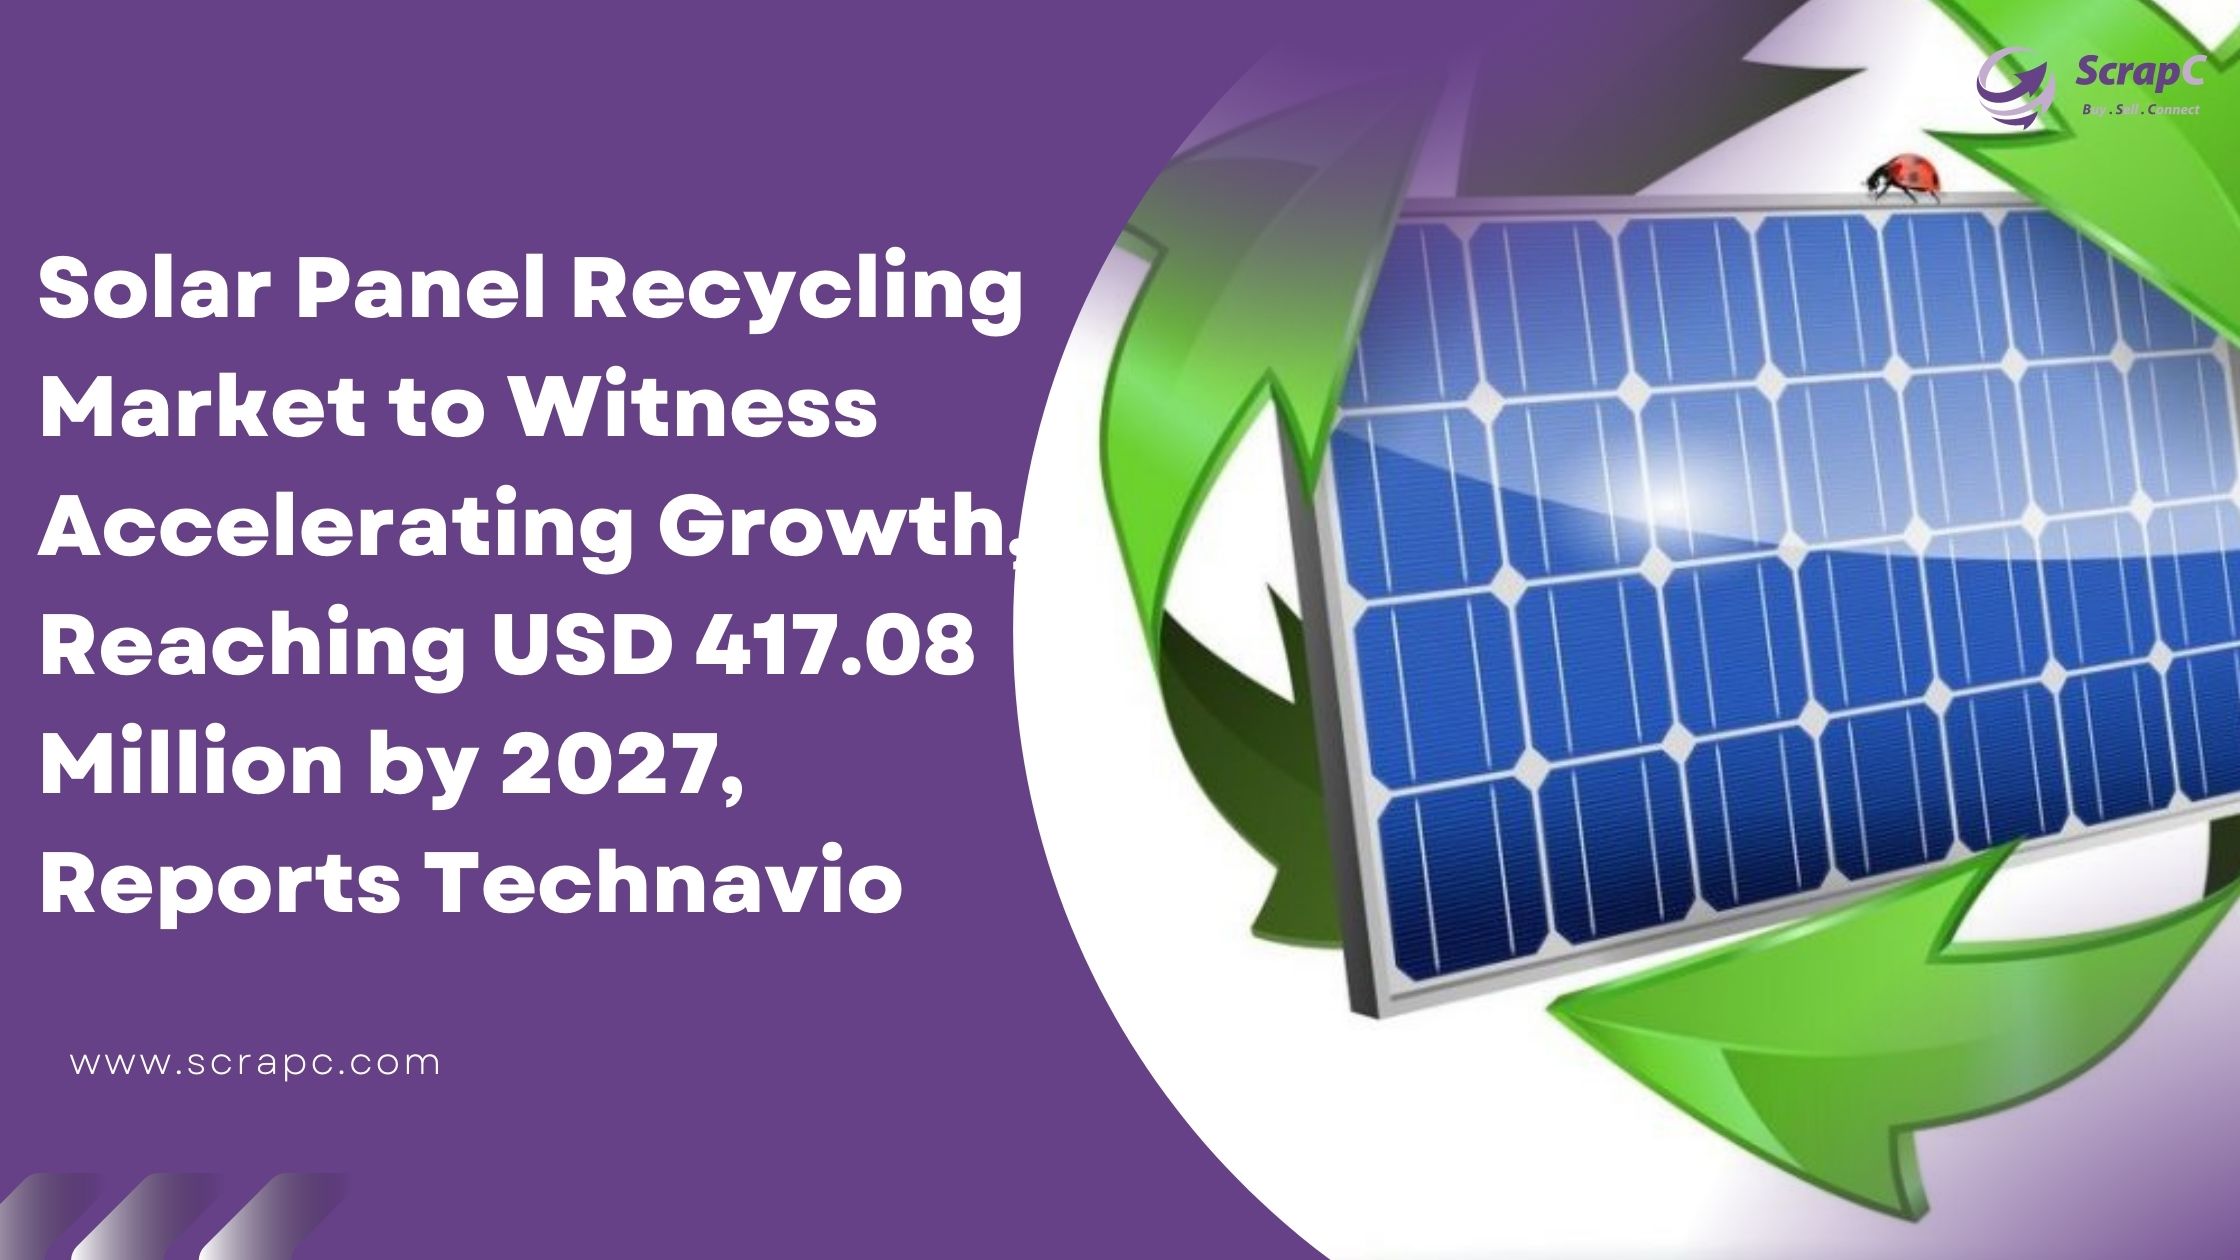 green energy, solar panels recycling, solar panel recycling